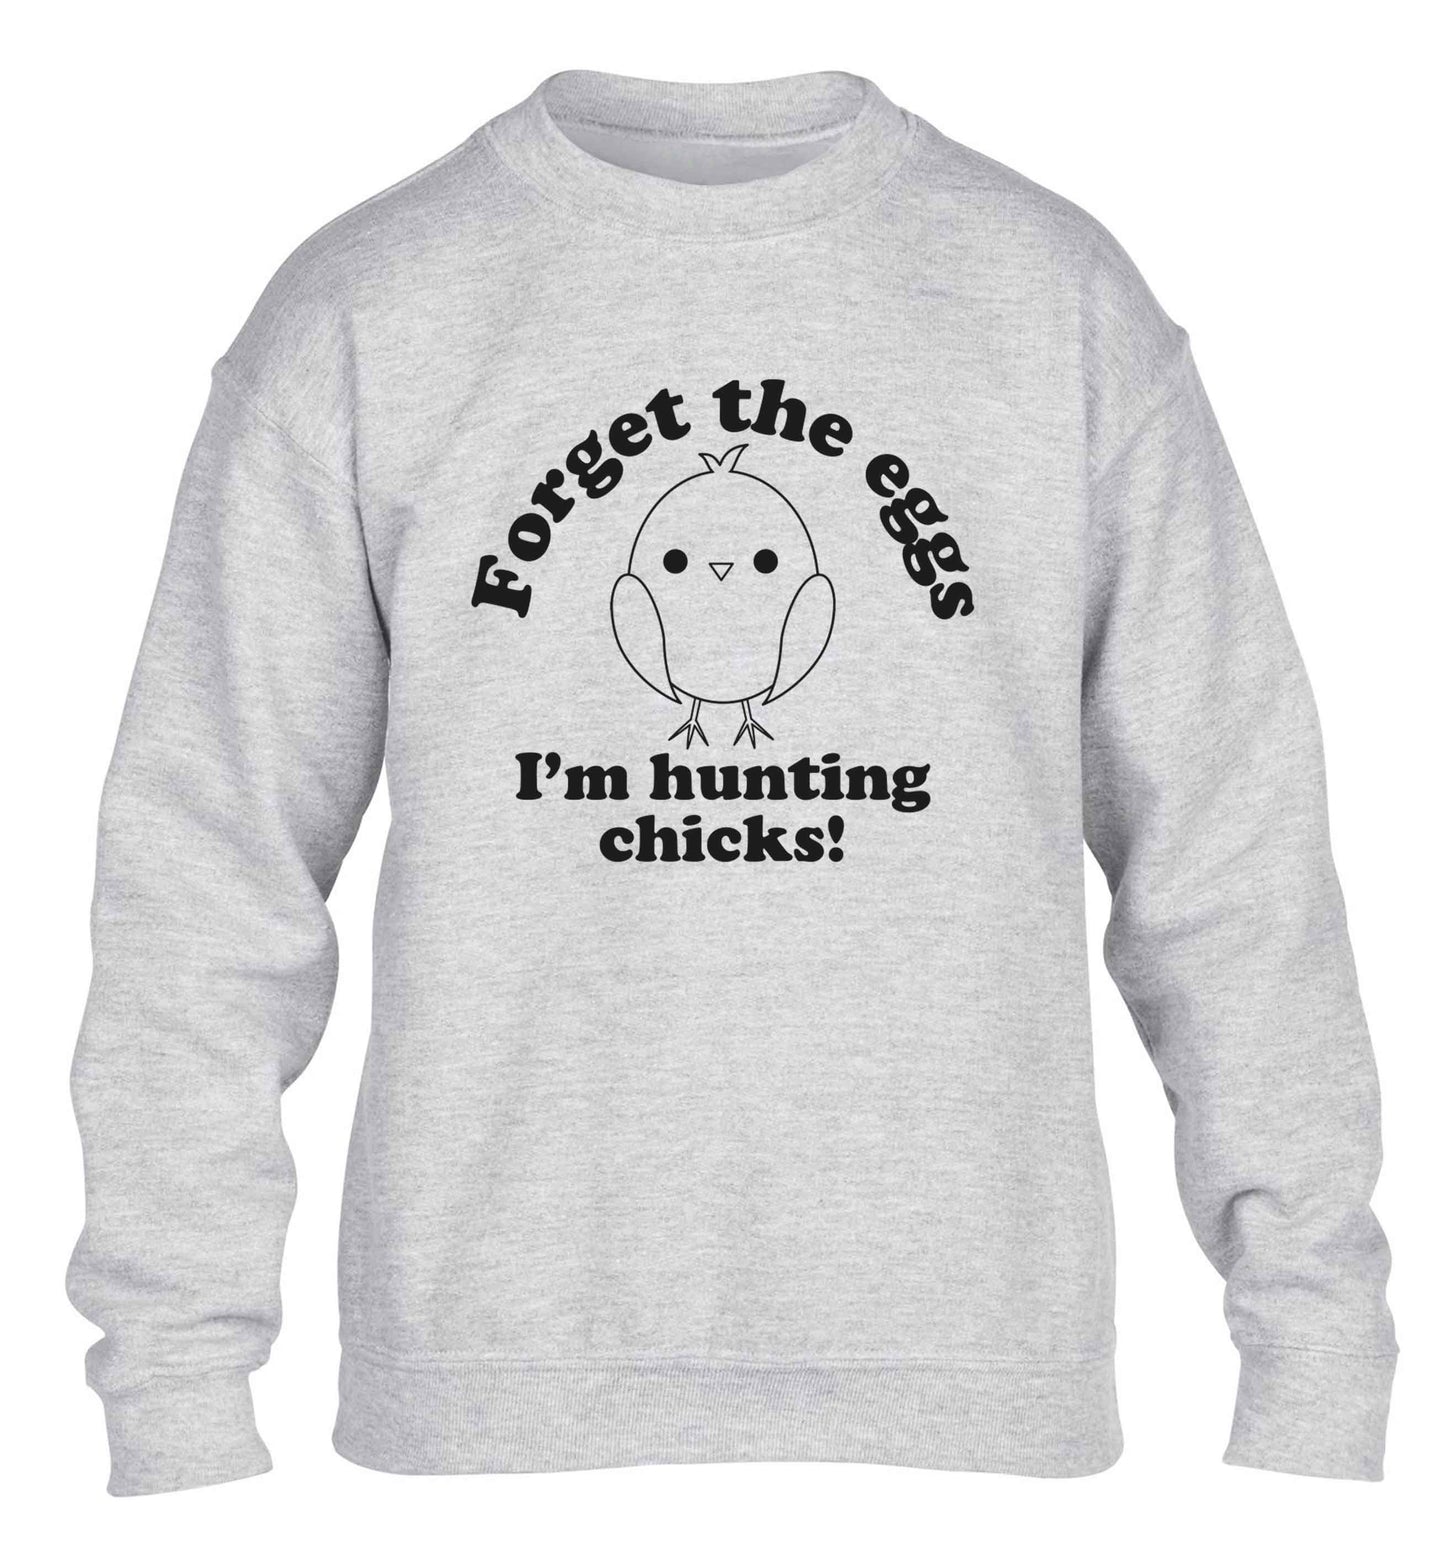 Forget the eggs I'm hunting chicks! children's grey sweater 12-13 Years